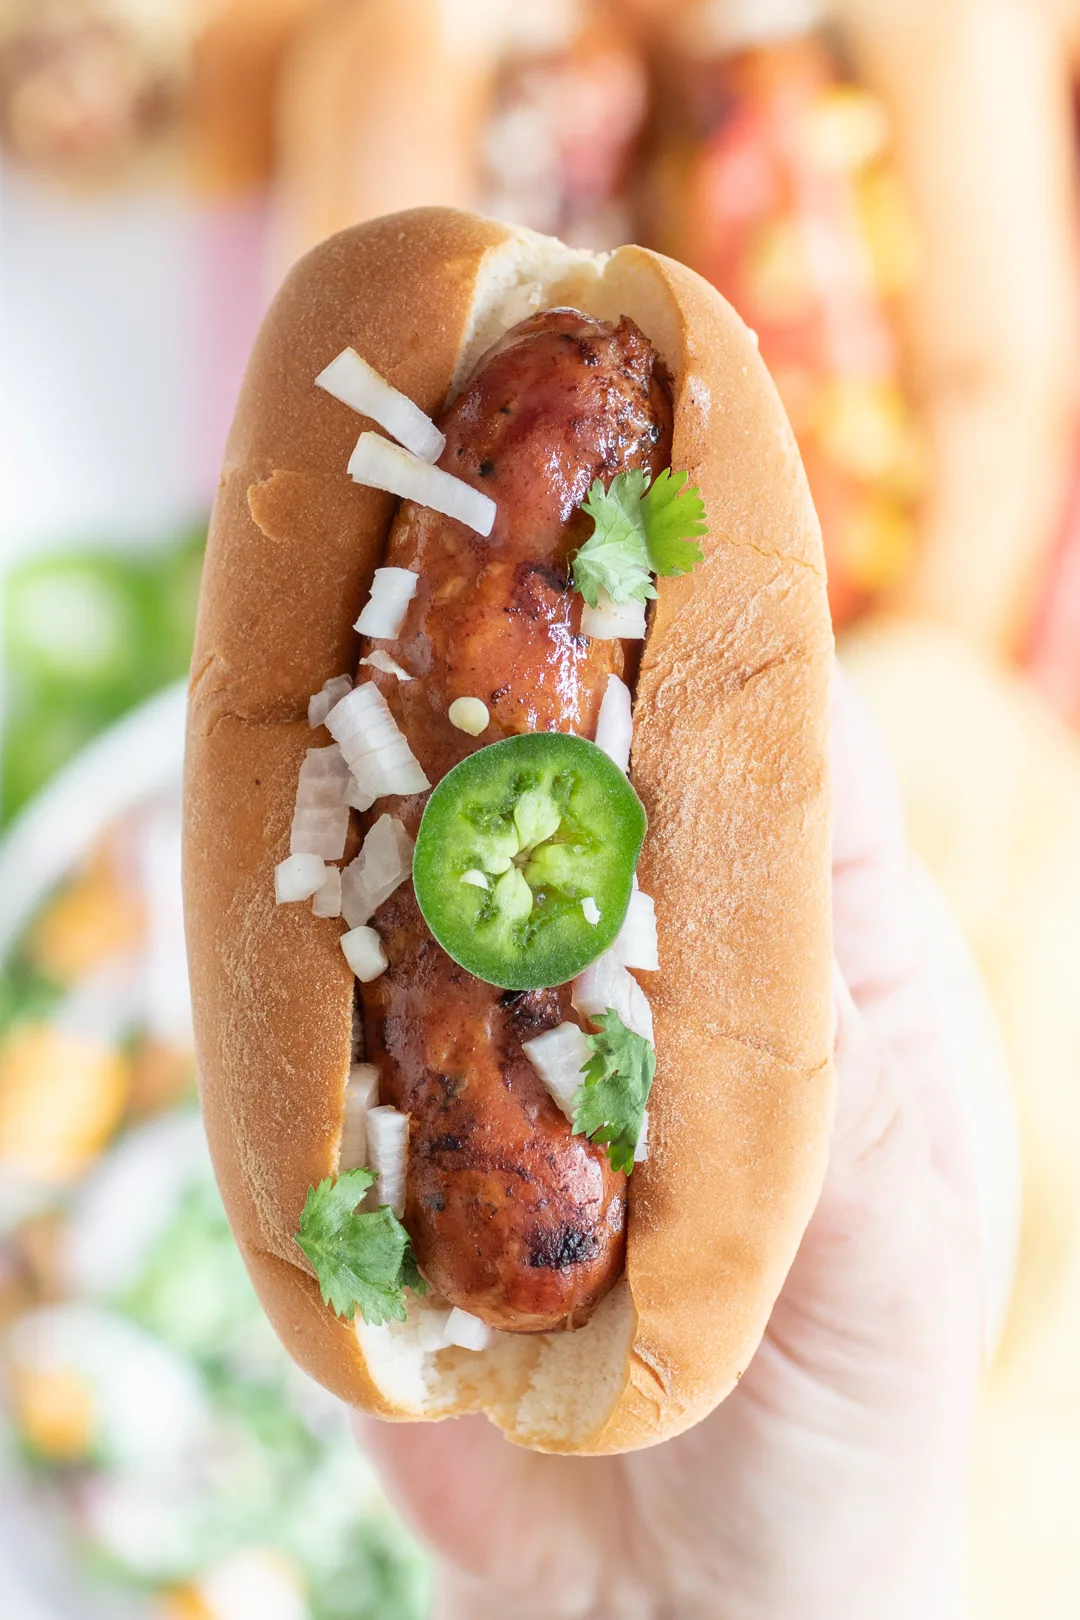 up close view of grilled cajun sausage topped with chopped onions, jalapeño slices and cilantro